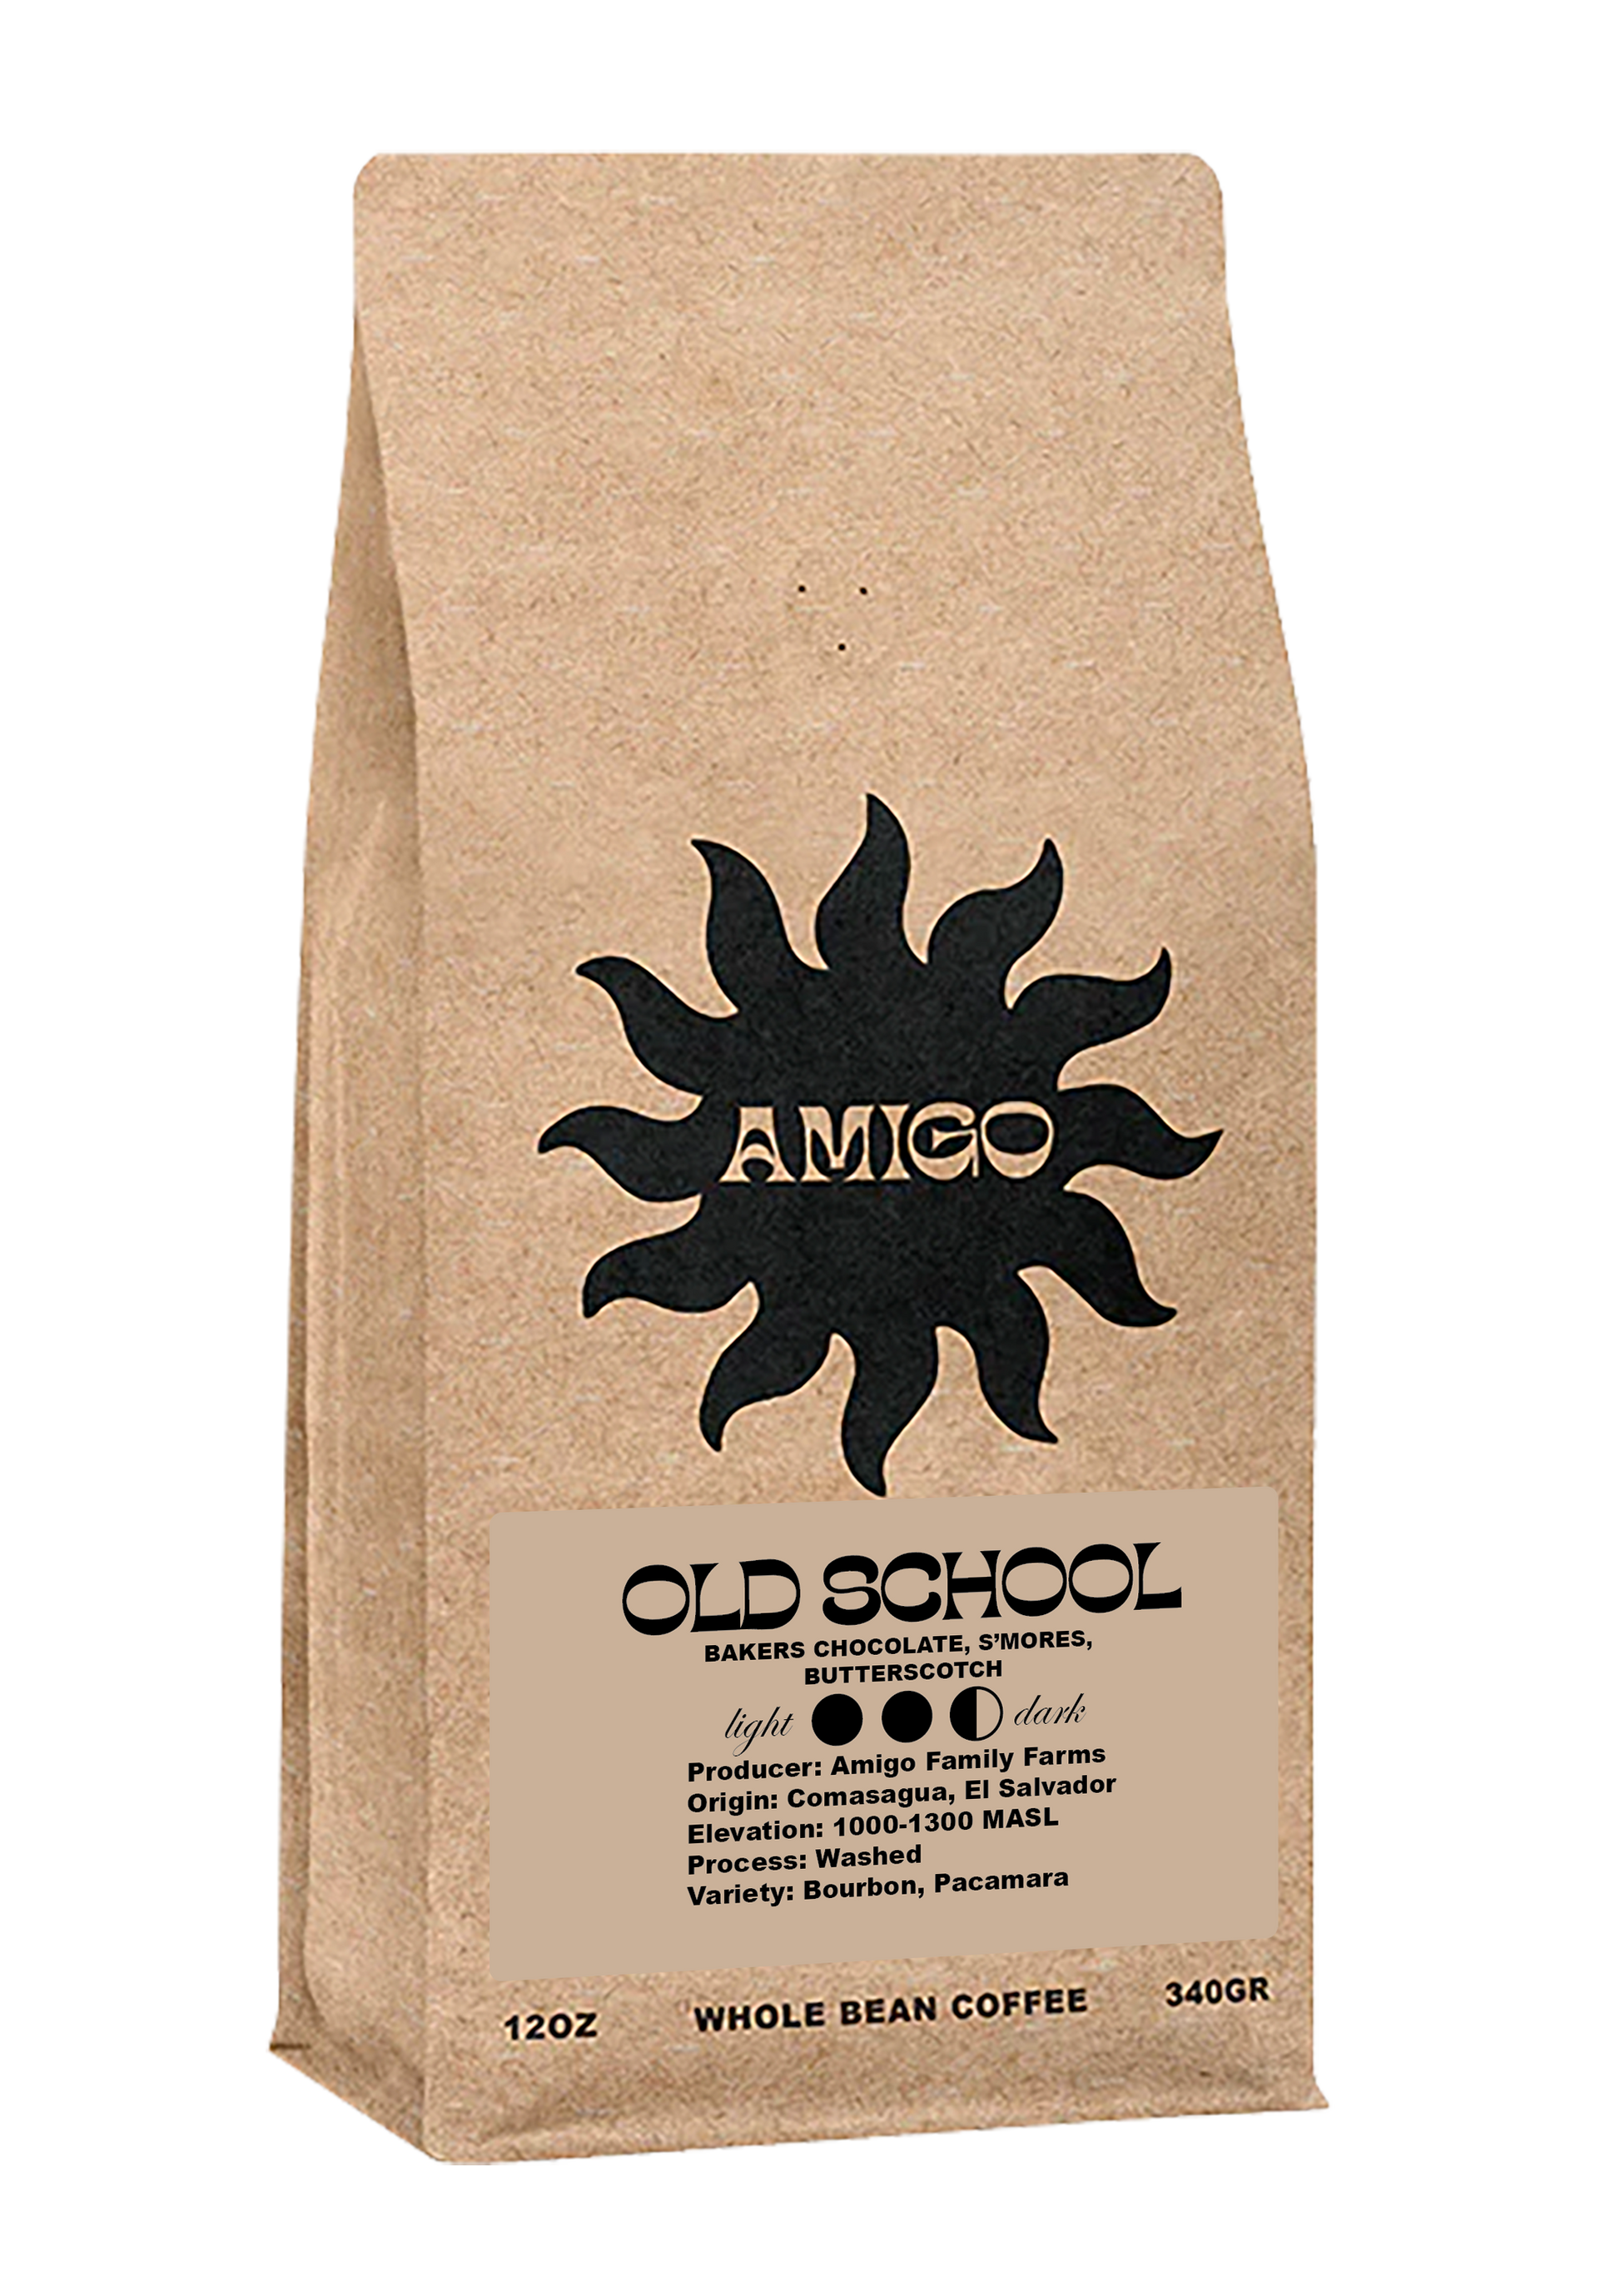 A bag of Old School coffee beans